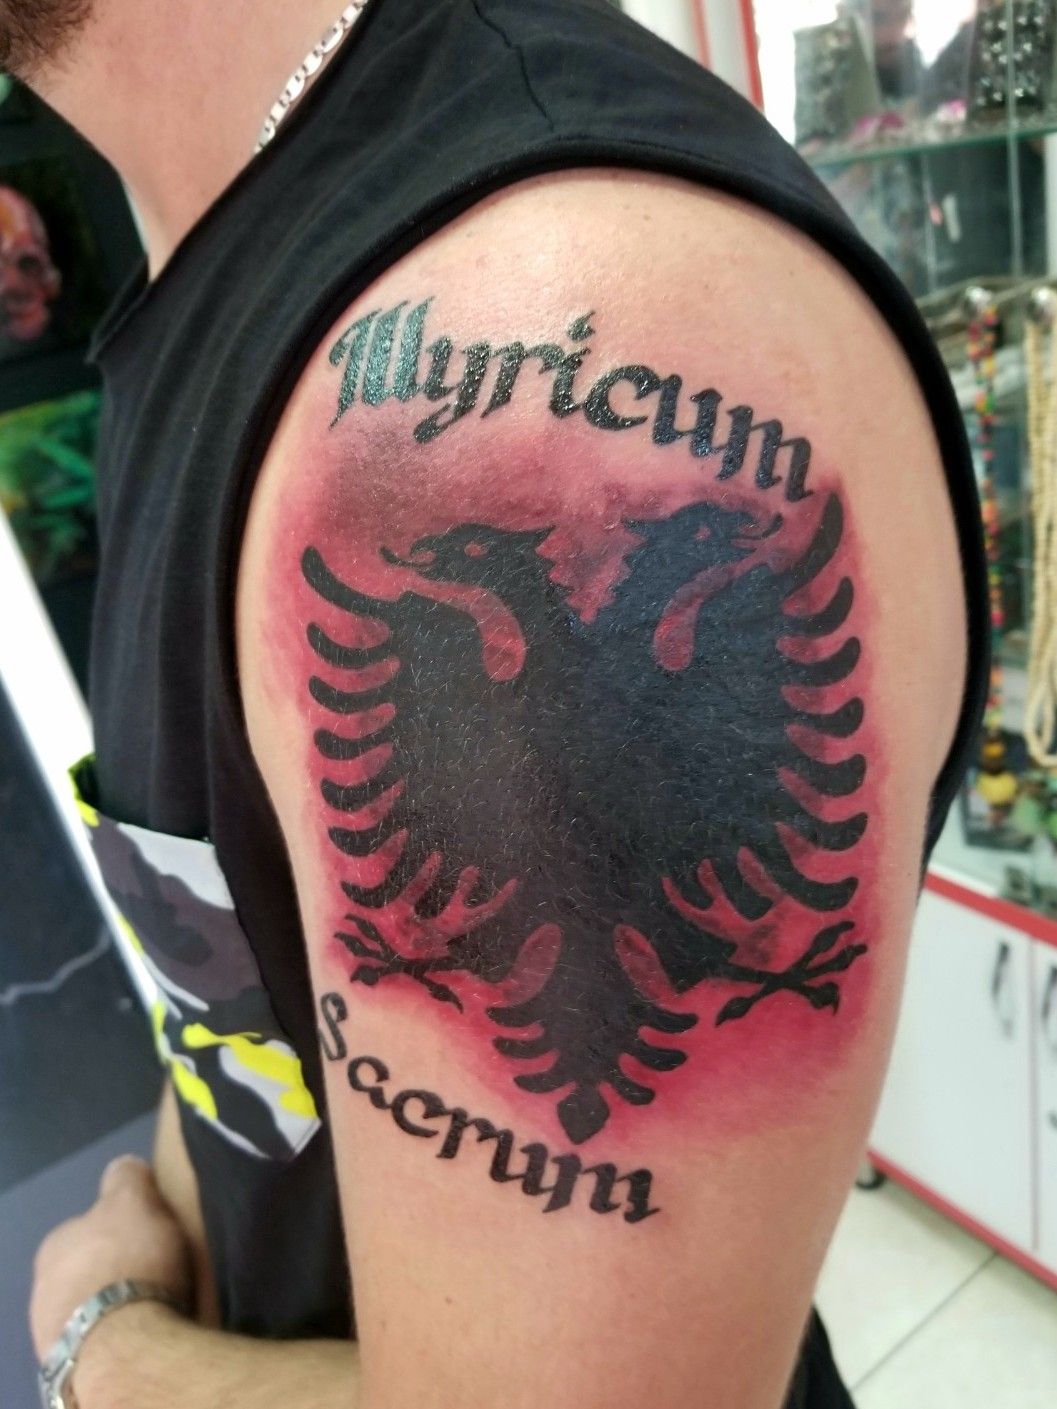 Joe Tattoo on Twitter Albanian eagle tattoo Show pride in our heritage  is often the subject of tattoos AlbanianEagle httpstcogpK4QLYJzi   Twitter